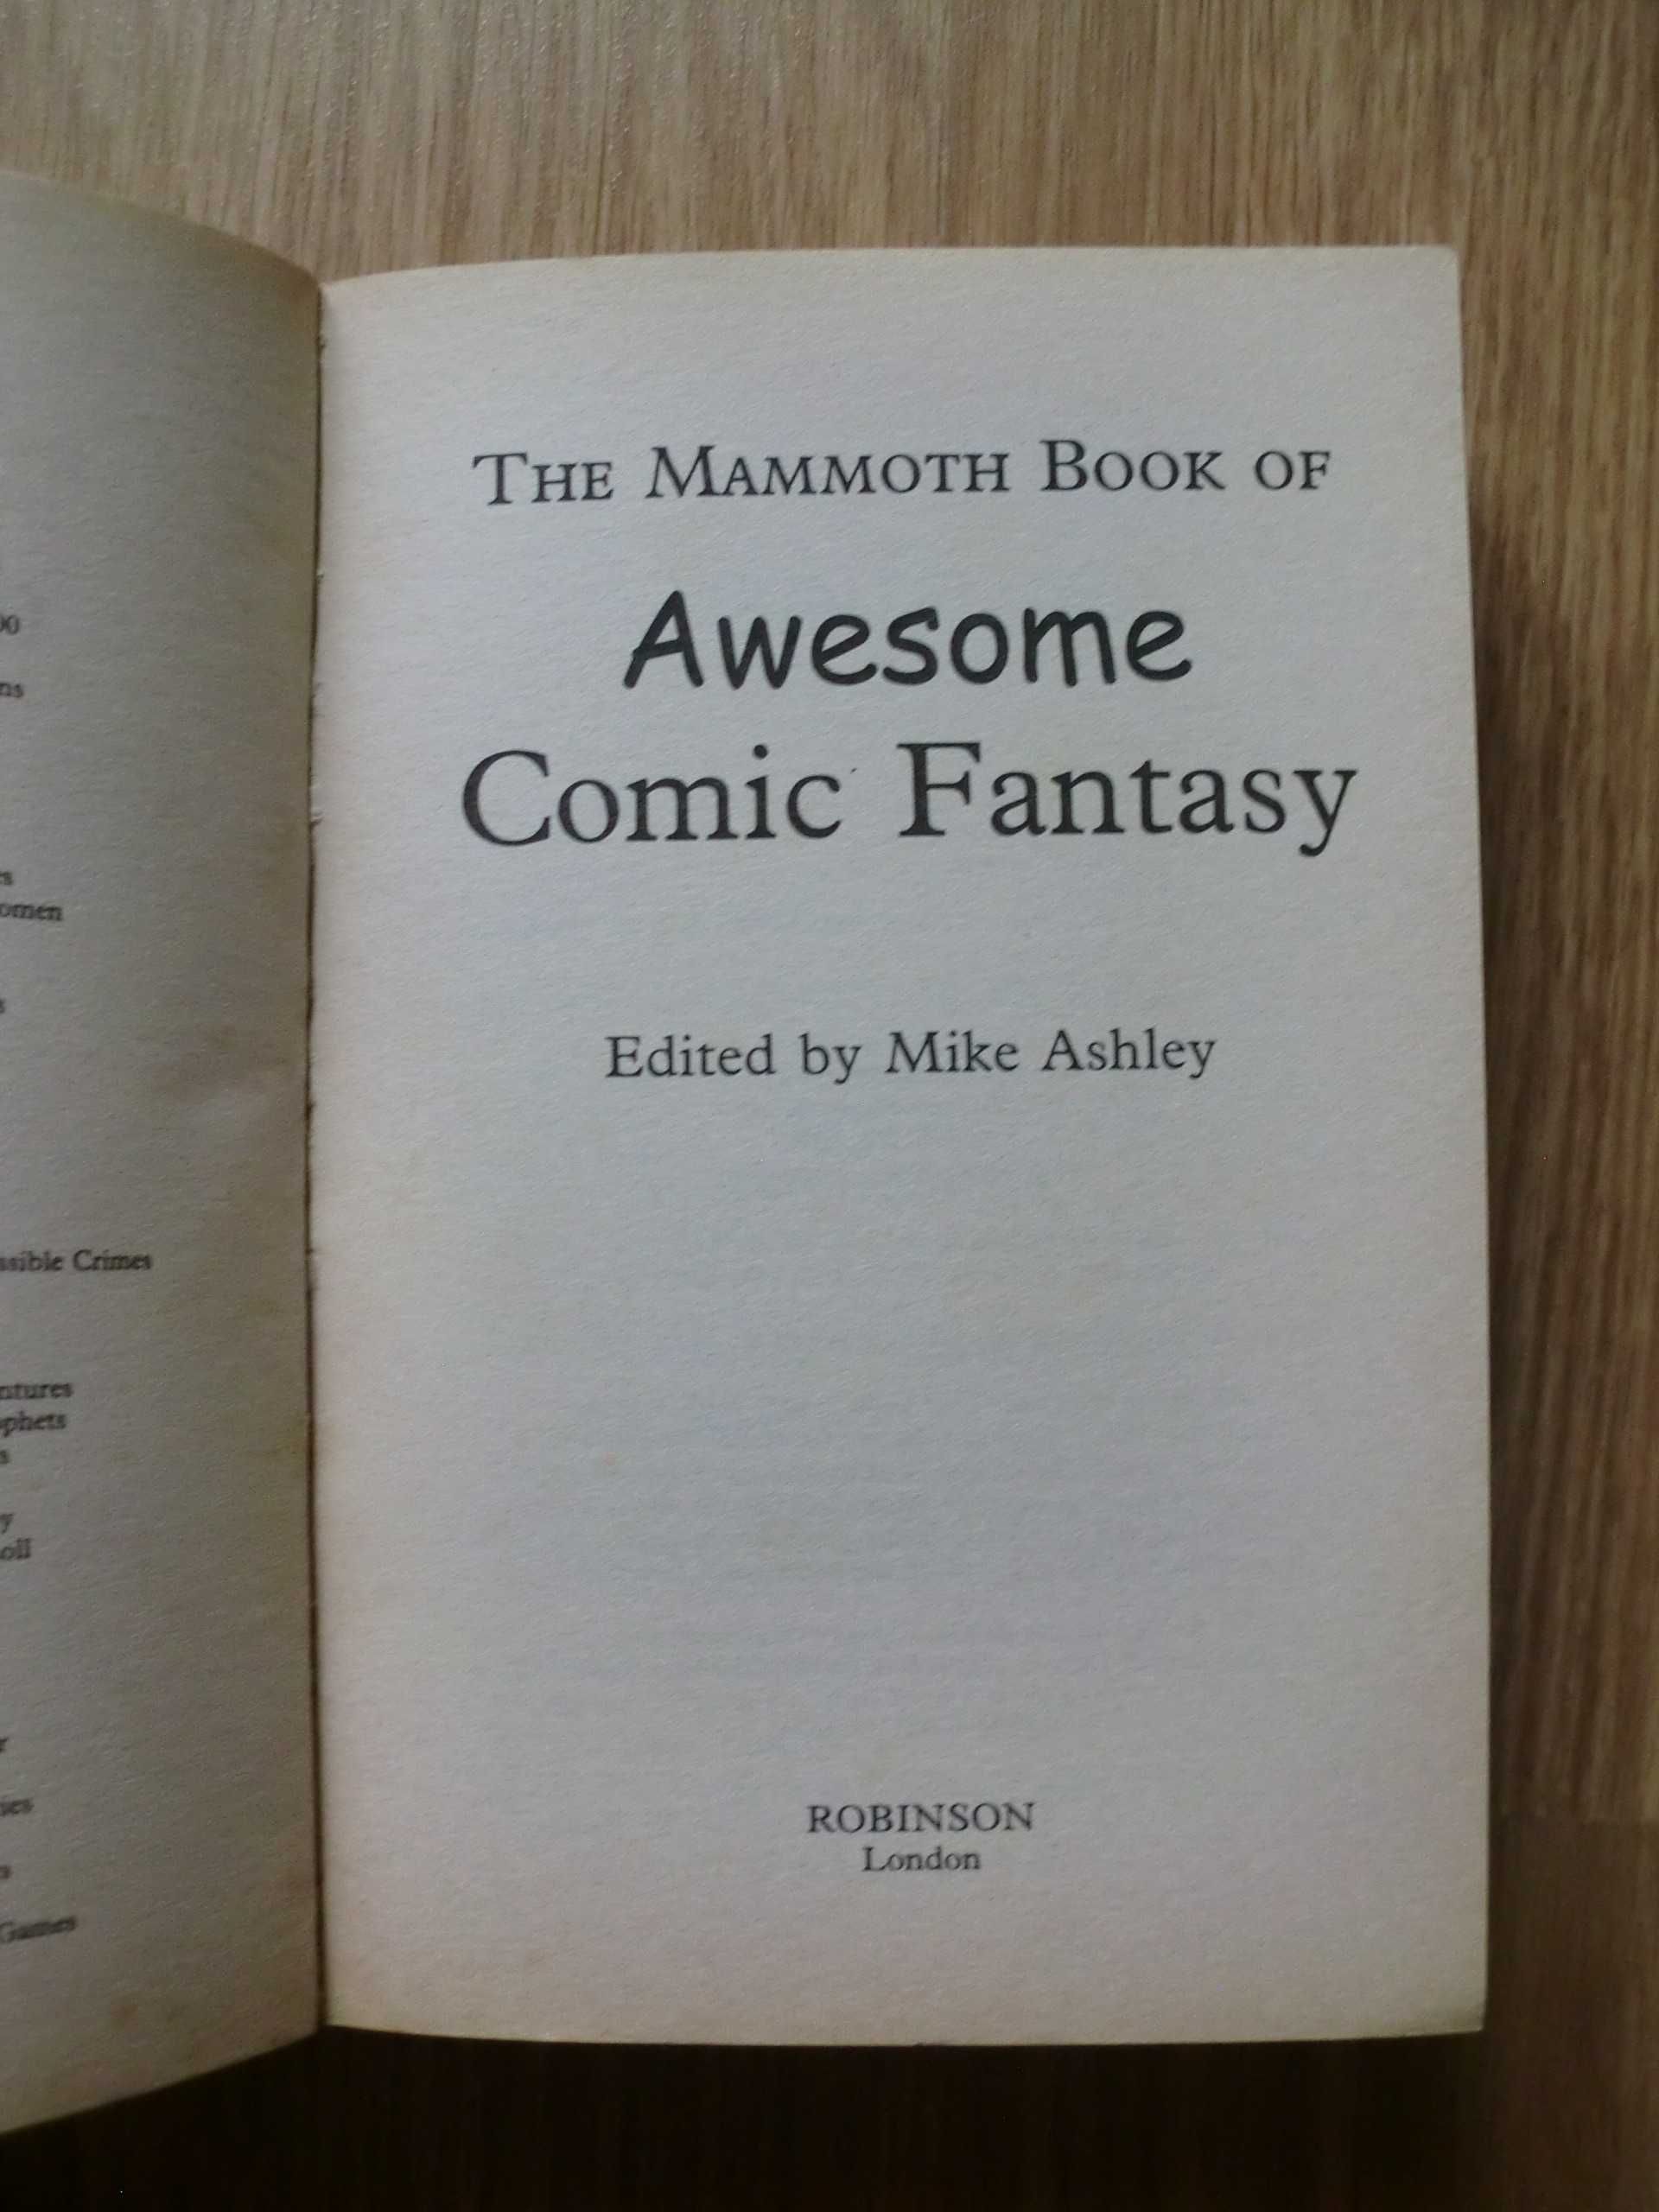 The Mammoth Book of Awesomw Comic Fantasy